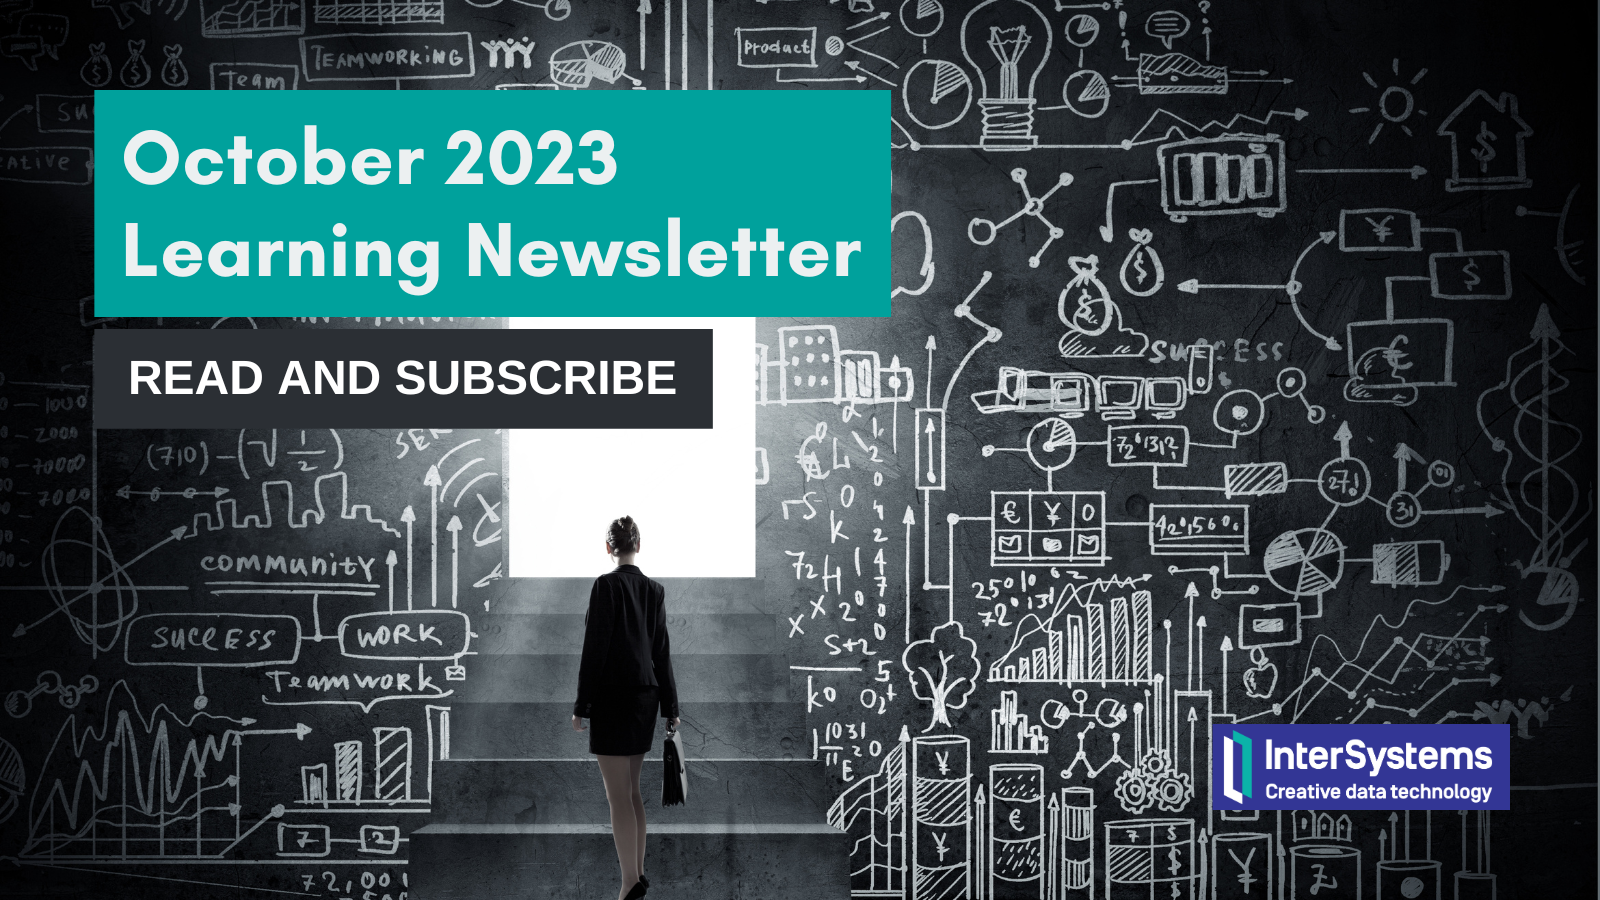 October 2023 Learning Newsletter: Read and Subscribe